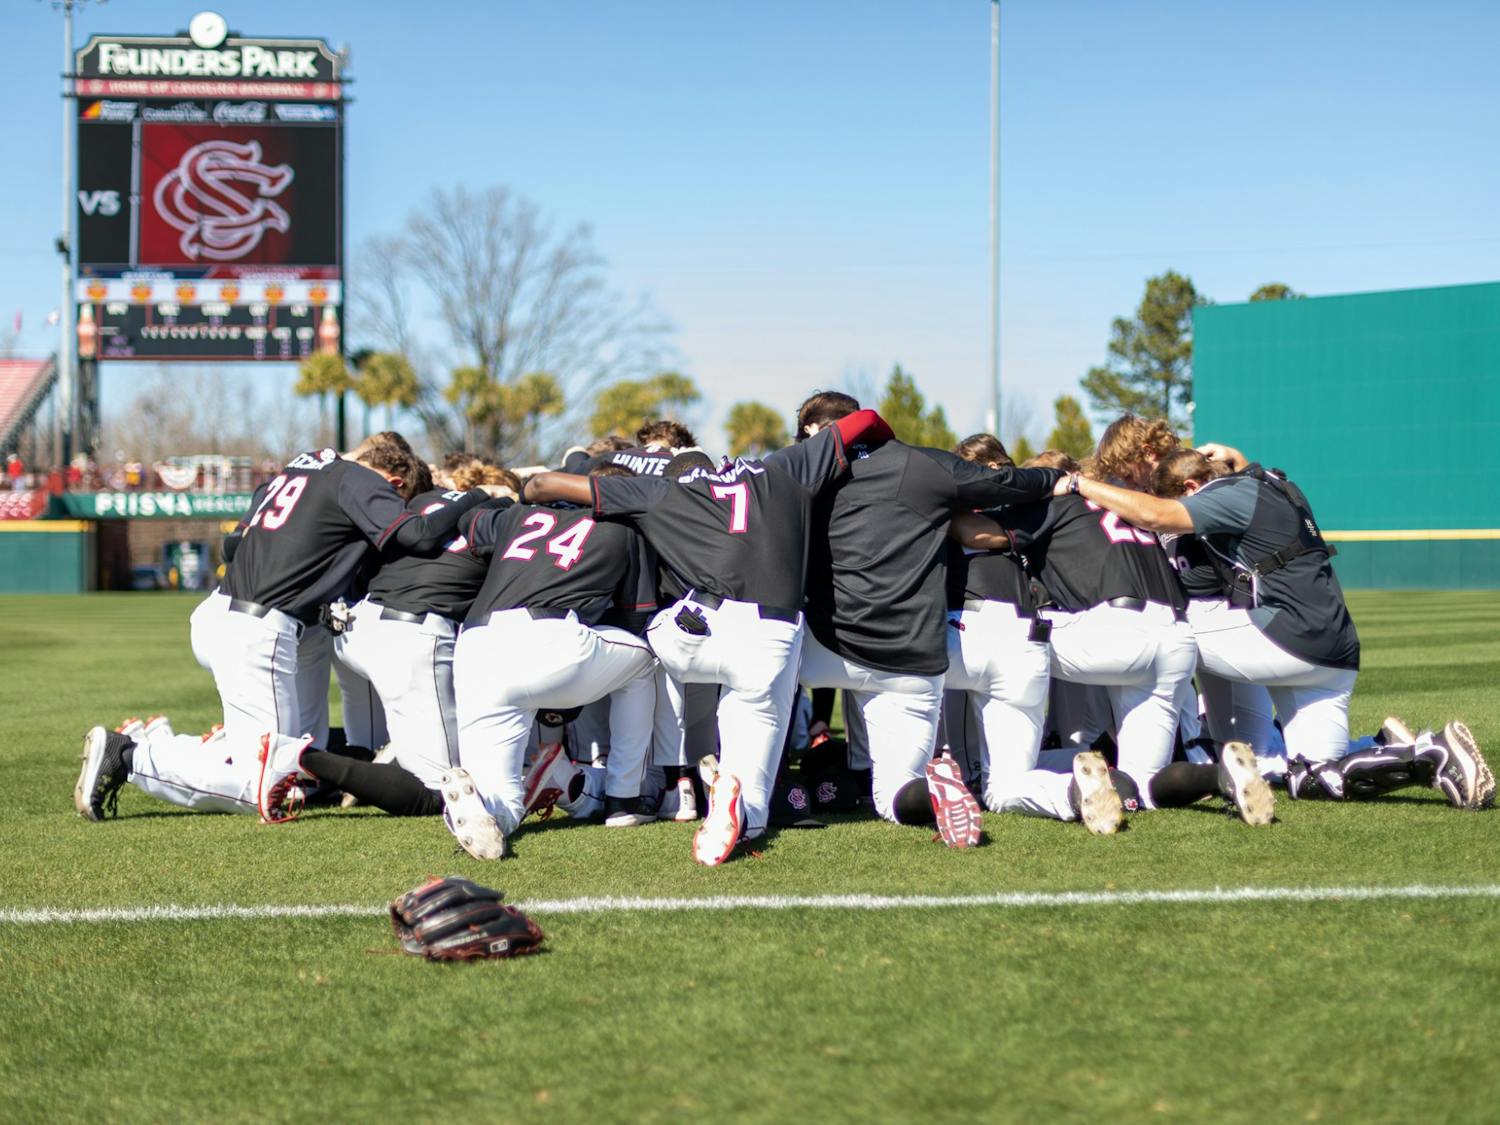 The Carolina baseball team takes a knee before their game against UNCG on Feb. 20, 2022. Carolina defeated UNCG in the last game of their series 8-7.